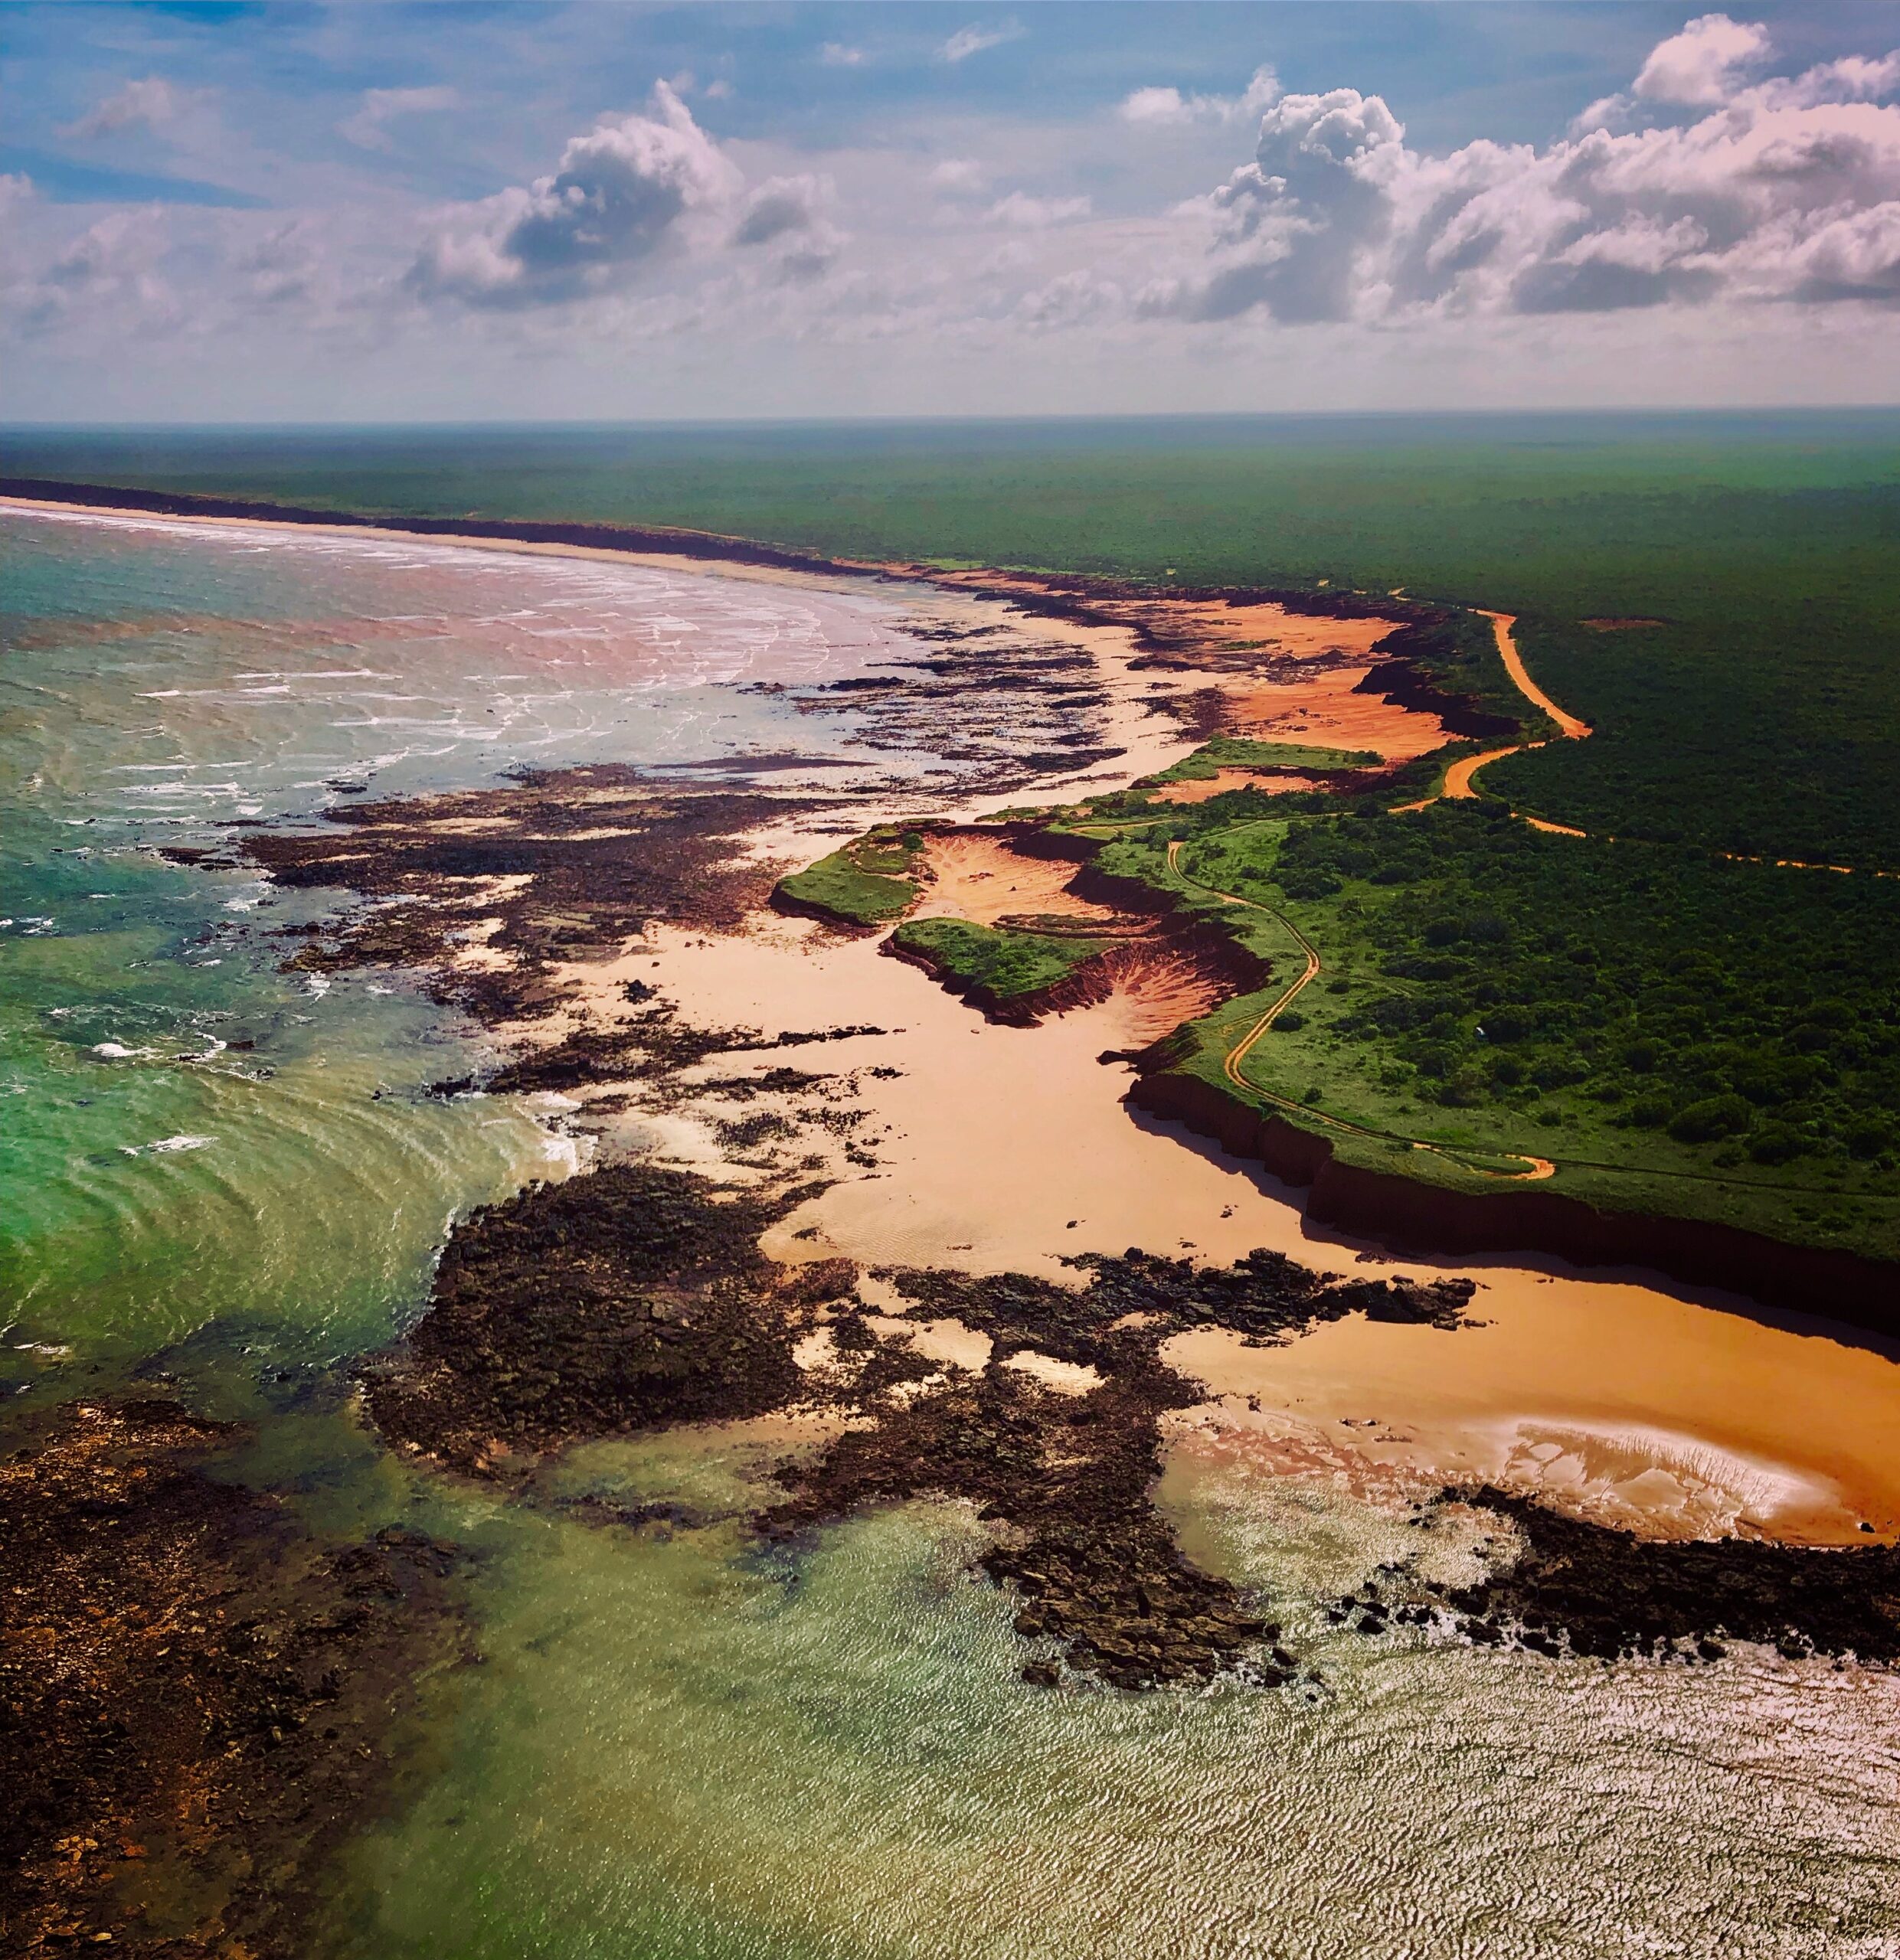 60 minute Broome Cliffs and Coast Scenic Helicopter Flight